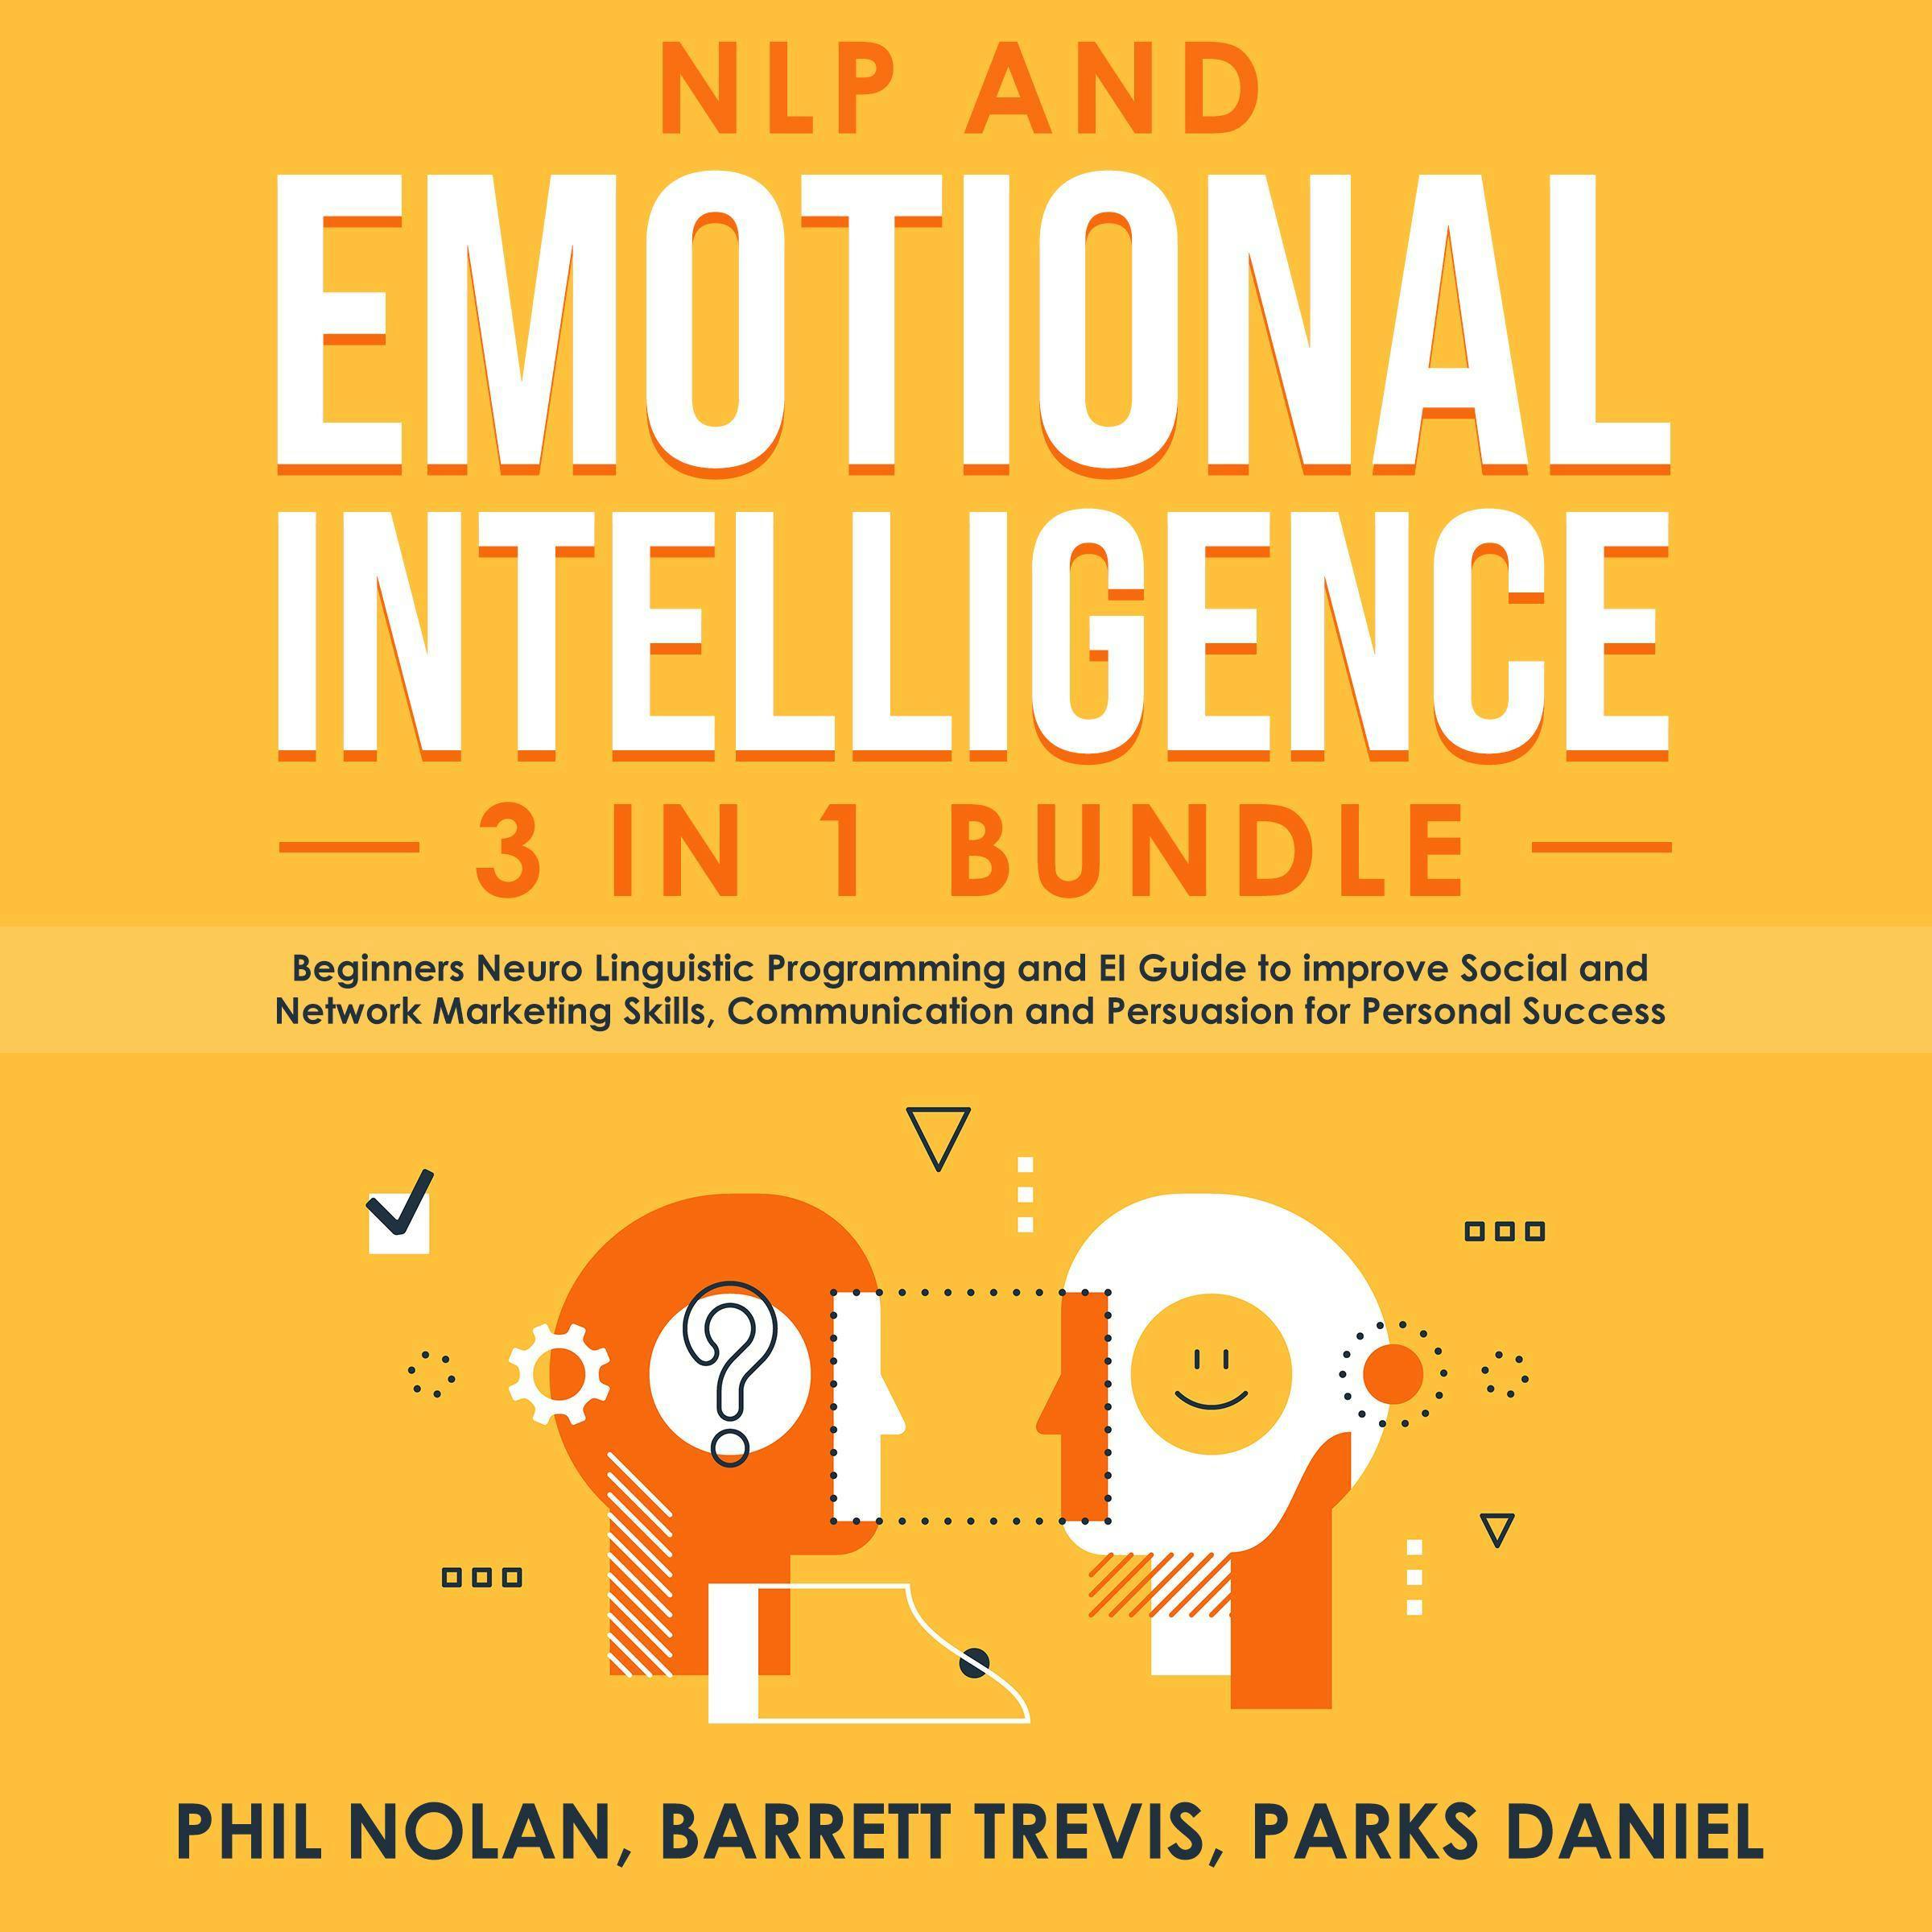 NLP and Emotional Intelligence 3 in 1 Bundle: Beginners Neuro Linguistic Programming and EI Guide to improve Social and Network Marketing Skills, Communication and Persuasion for Personal Success - undefined